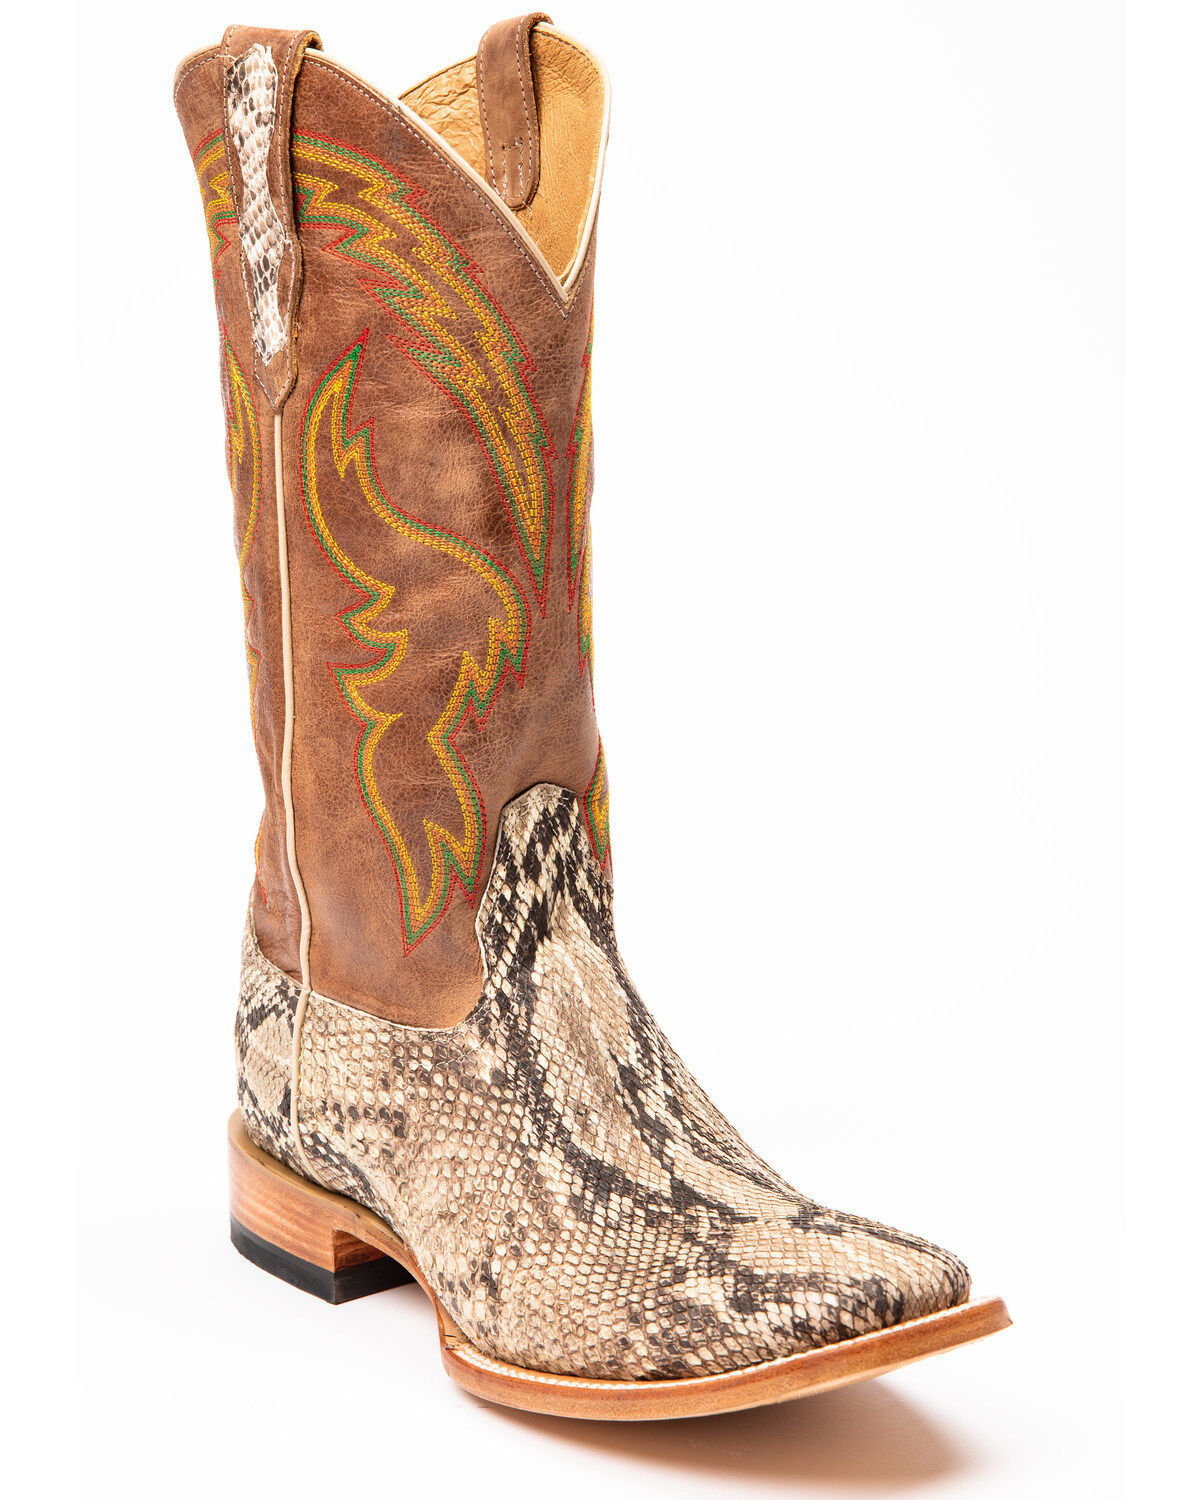 Buy > water snake boots > in stock